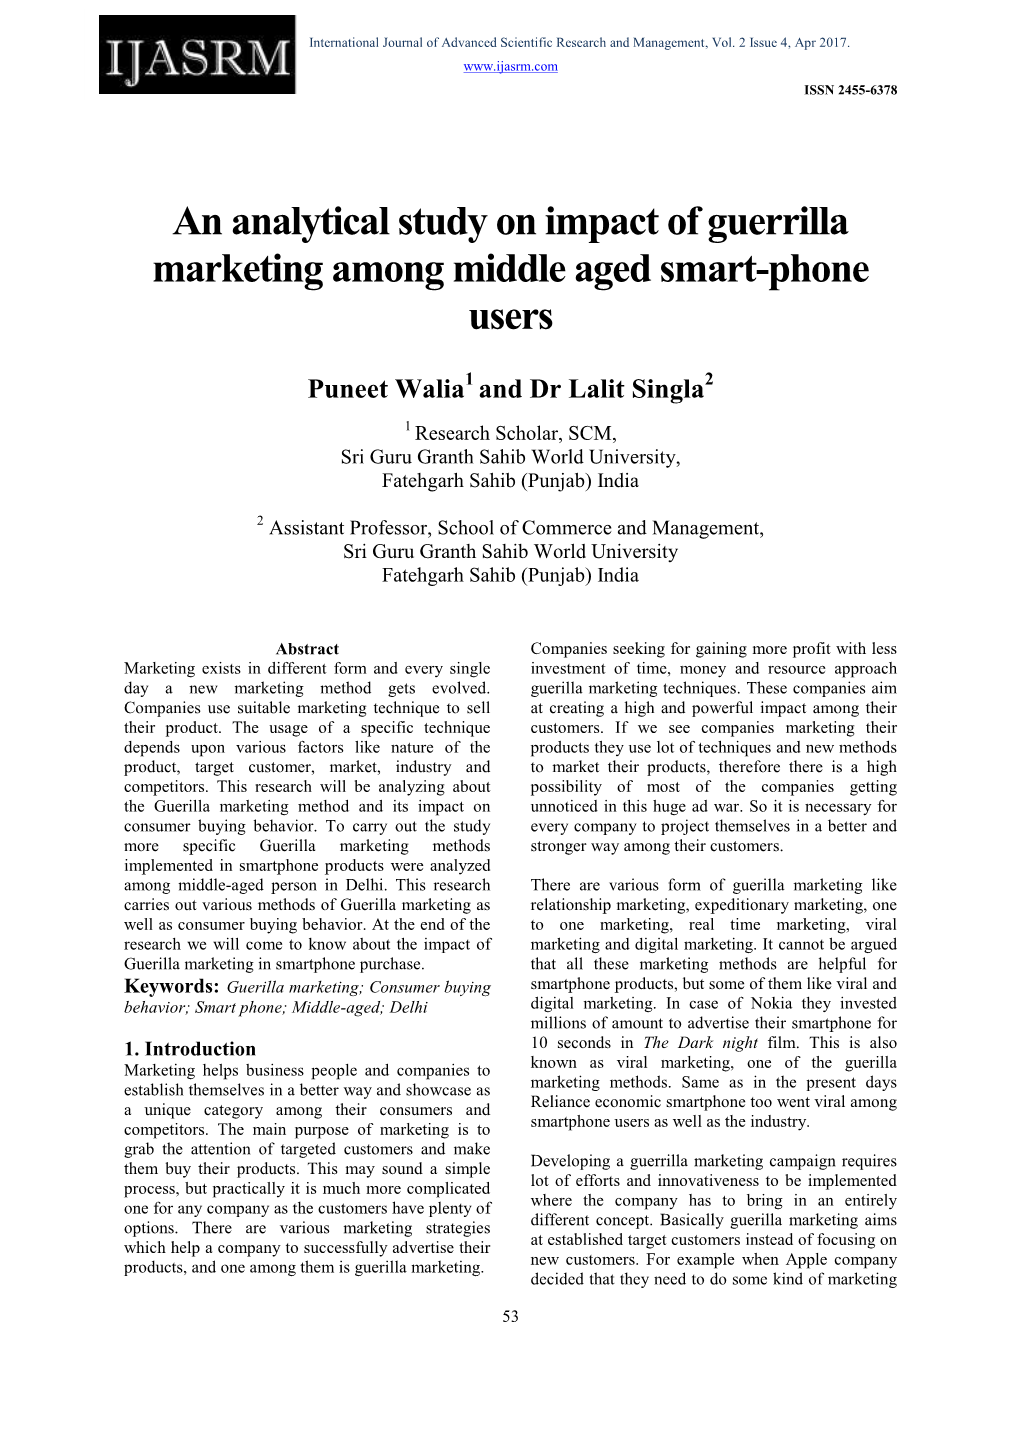 An Analytical Study on Impact of Guerrilla Marketing Among Middle Aged Smart-Phone Users